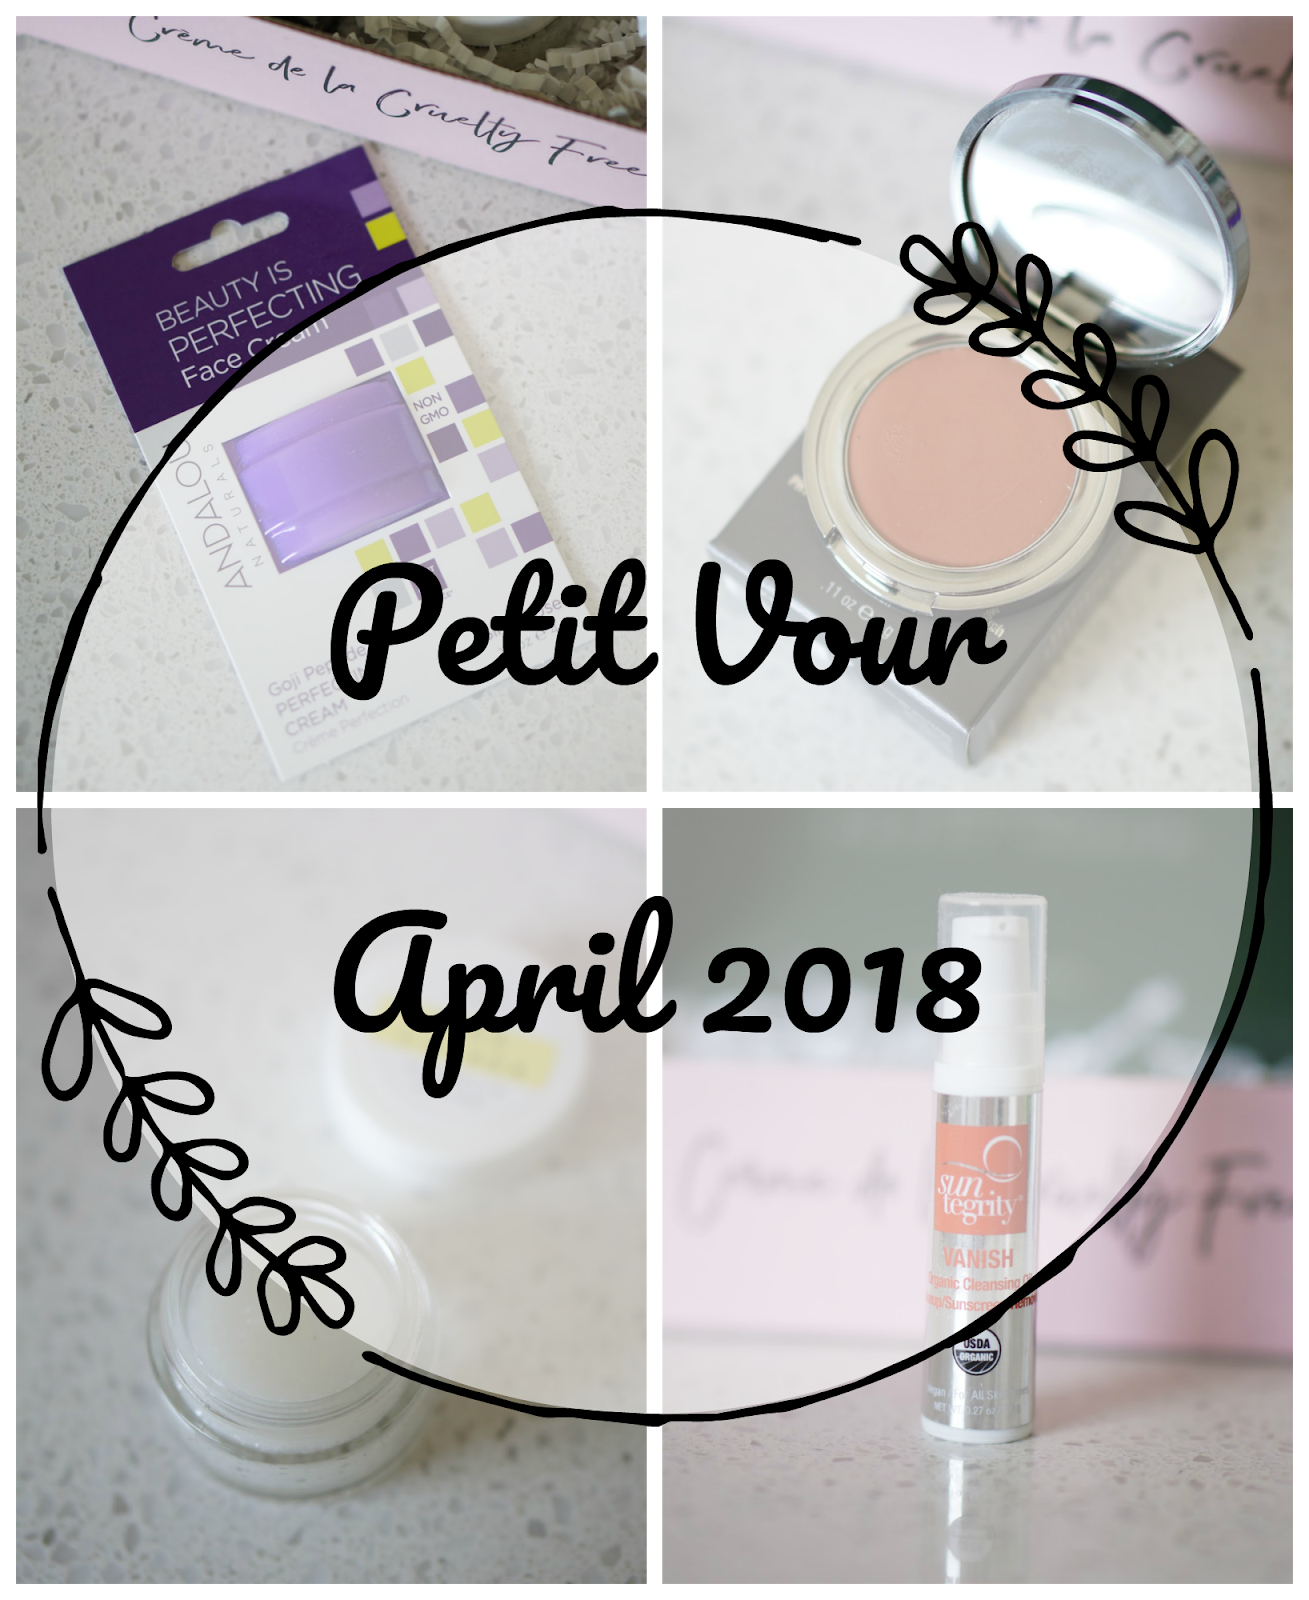 Popular North Carolina style blogger Rebecca Lately shares her April 2018 Petit Vour box. Click to here to read what she got and what she loved!